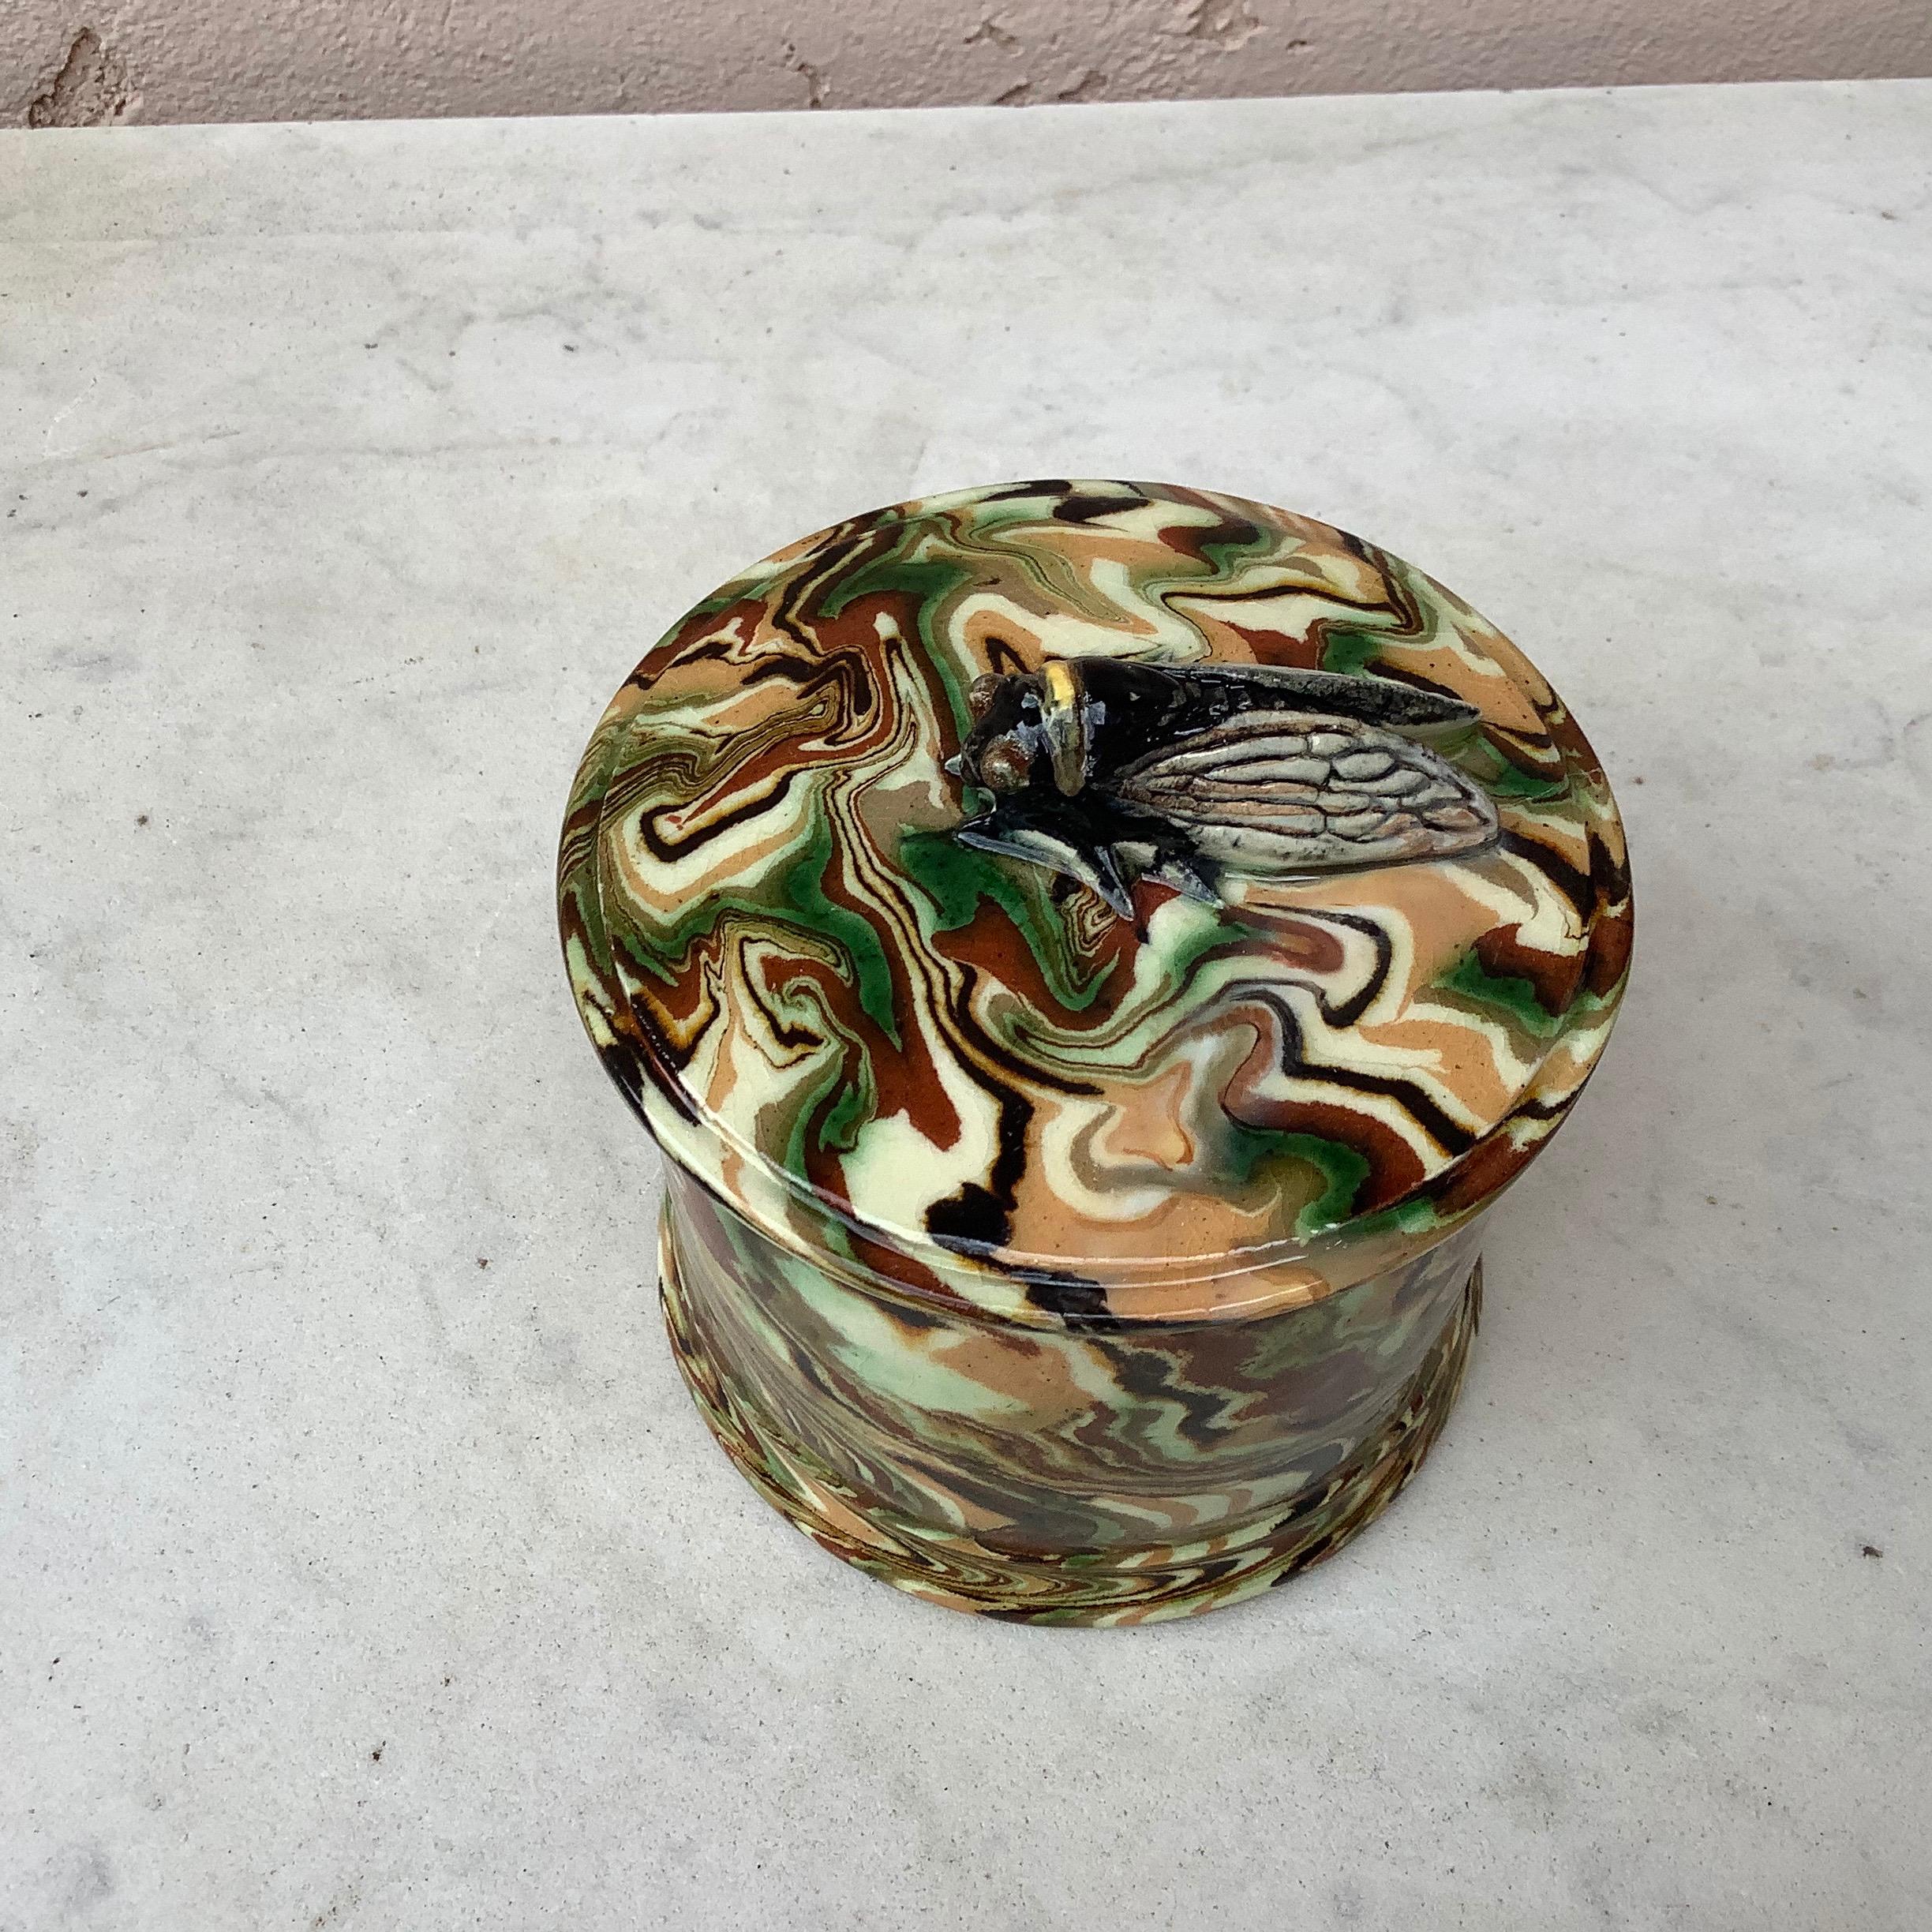 Rare Majolica box signed Pichon Uzes with cicada, circa 1890.
Pichon á Uzes is a family-owned pottery factory located in the town of Uzes in the south of France. The pottery has been in operation since 1802. In the 19th century, Pichon was a